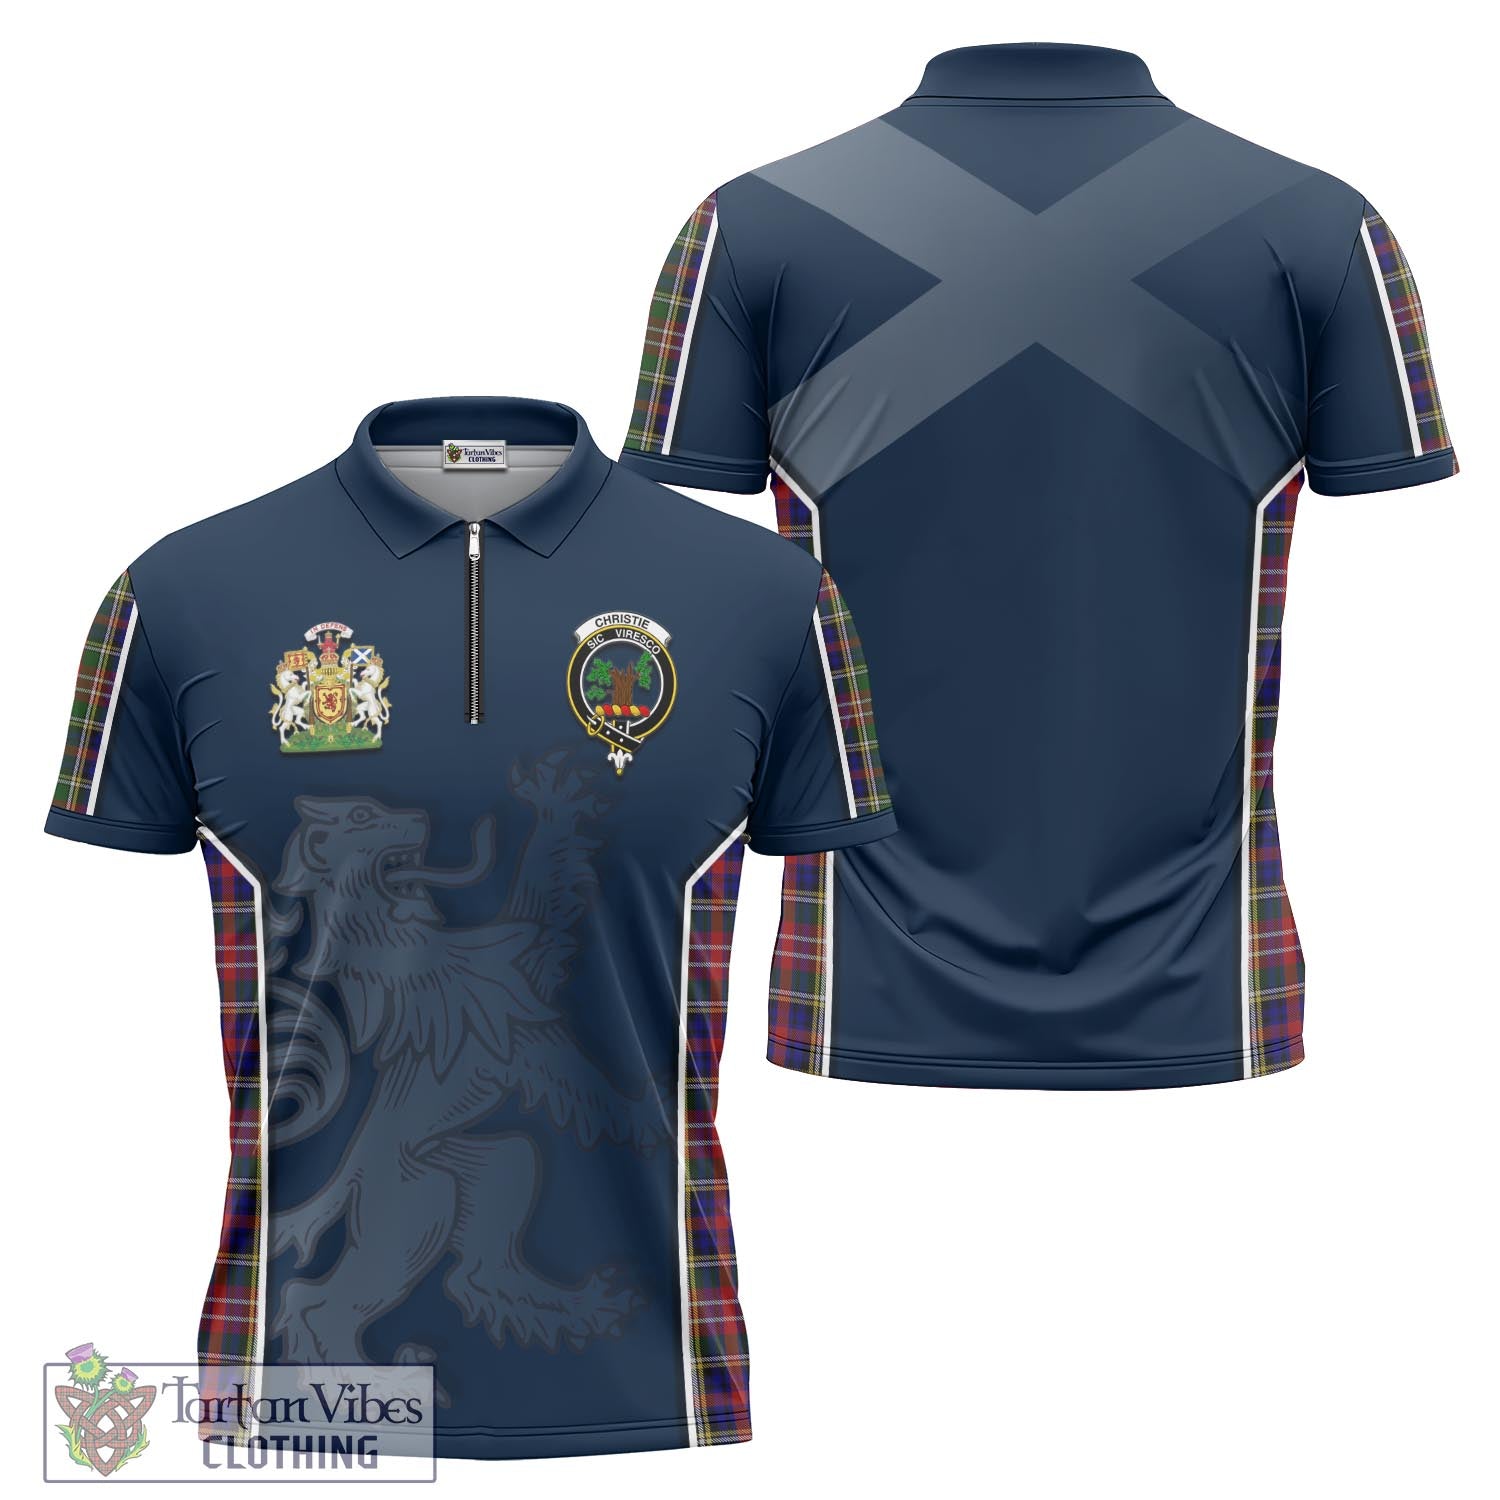 Tartan Vibes Clothing Christie Tartan Zipper Polo Shirt with Family Crest and Lion Rampant Vibes Sport Style